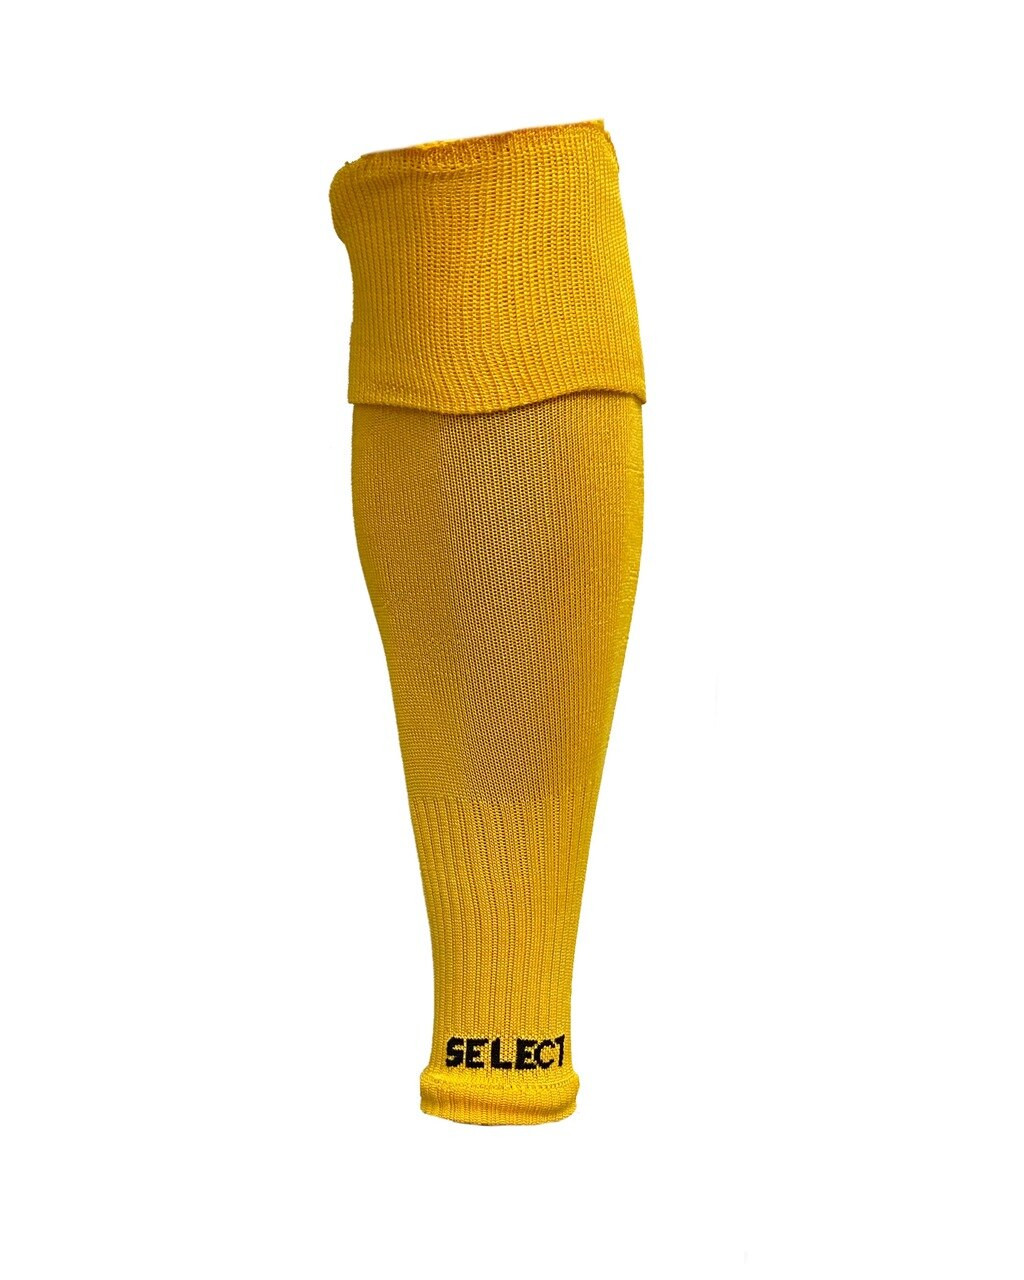 FOOTLESS SOCKS - YELLOW - Select Football (Evolution Sports Imports Pty ...